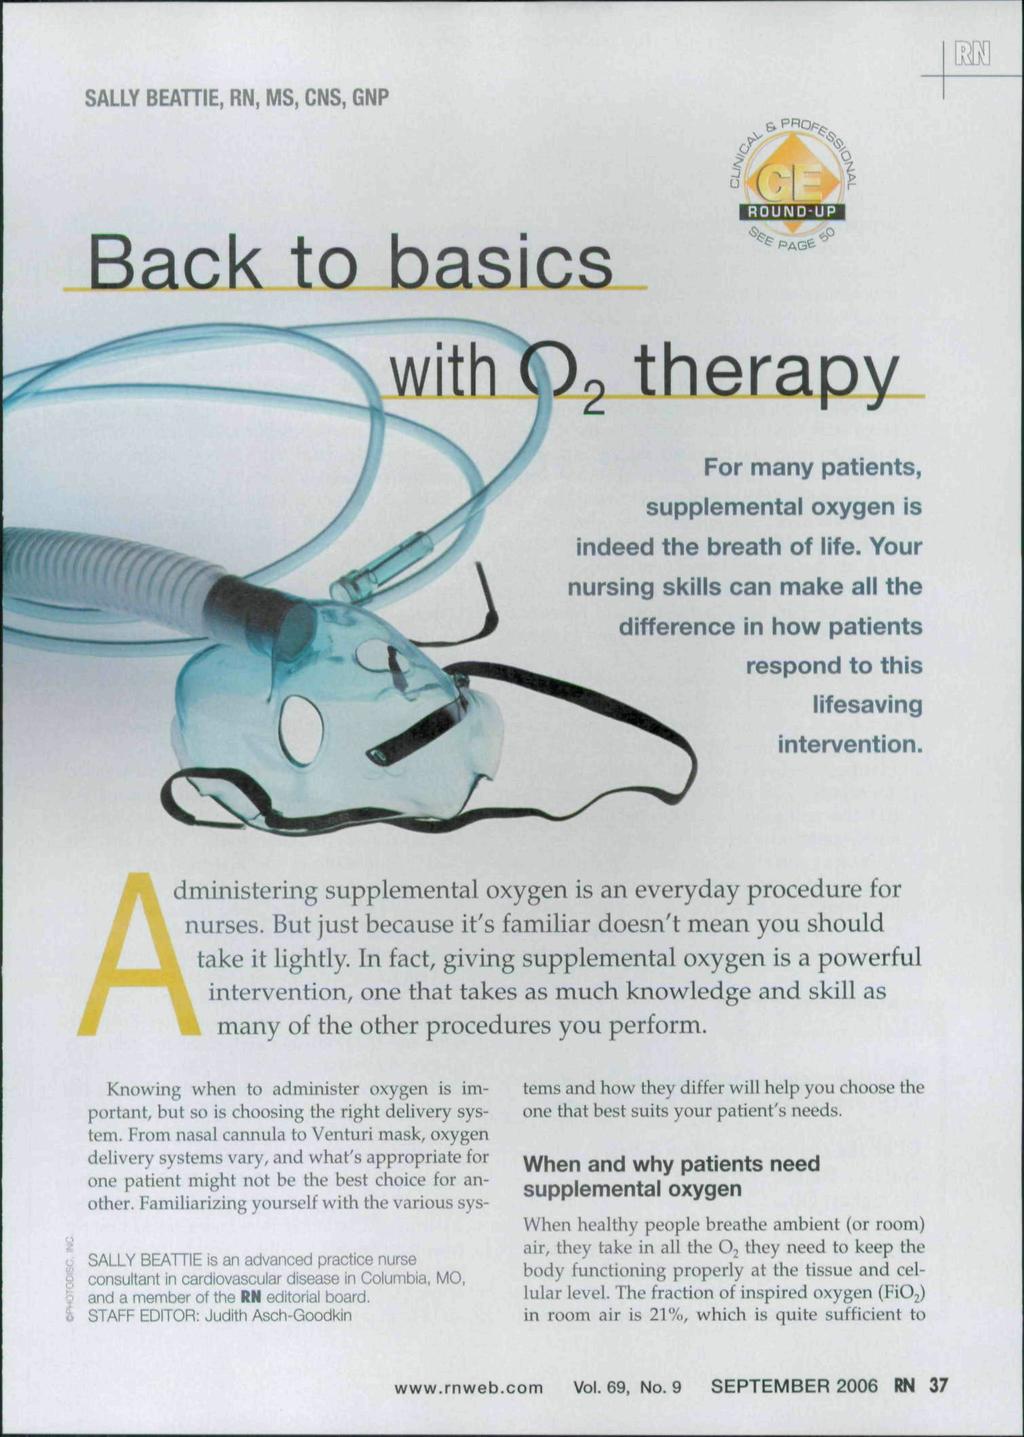 SALLY BEAniE, RN, MS. CNS, GNP Back to basics 2 therapy. For many patients, supplemental oxygen is indeed the breath of life.